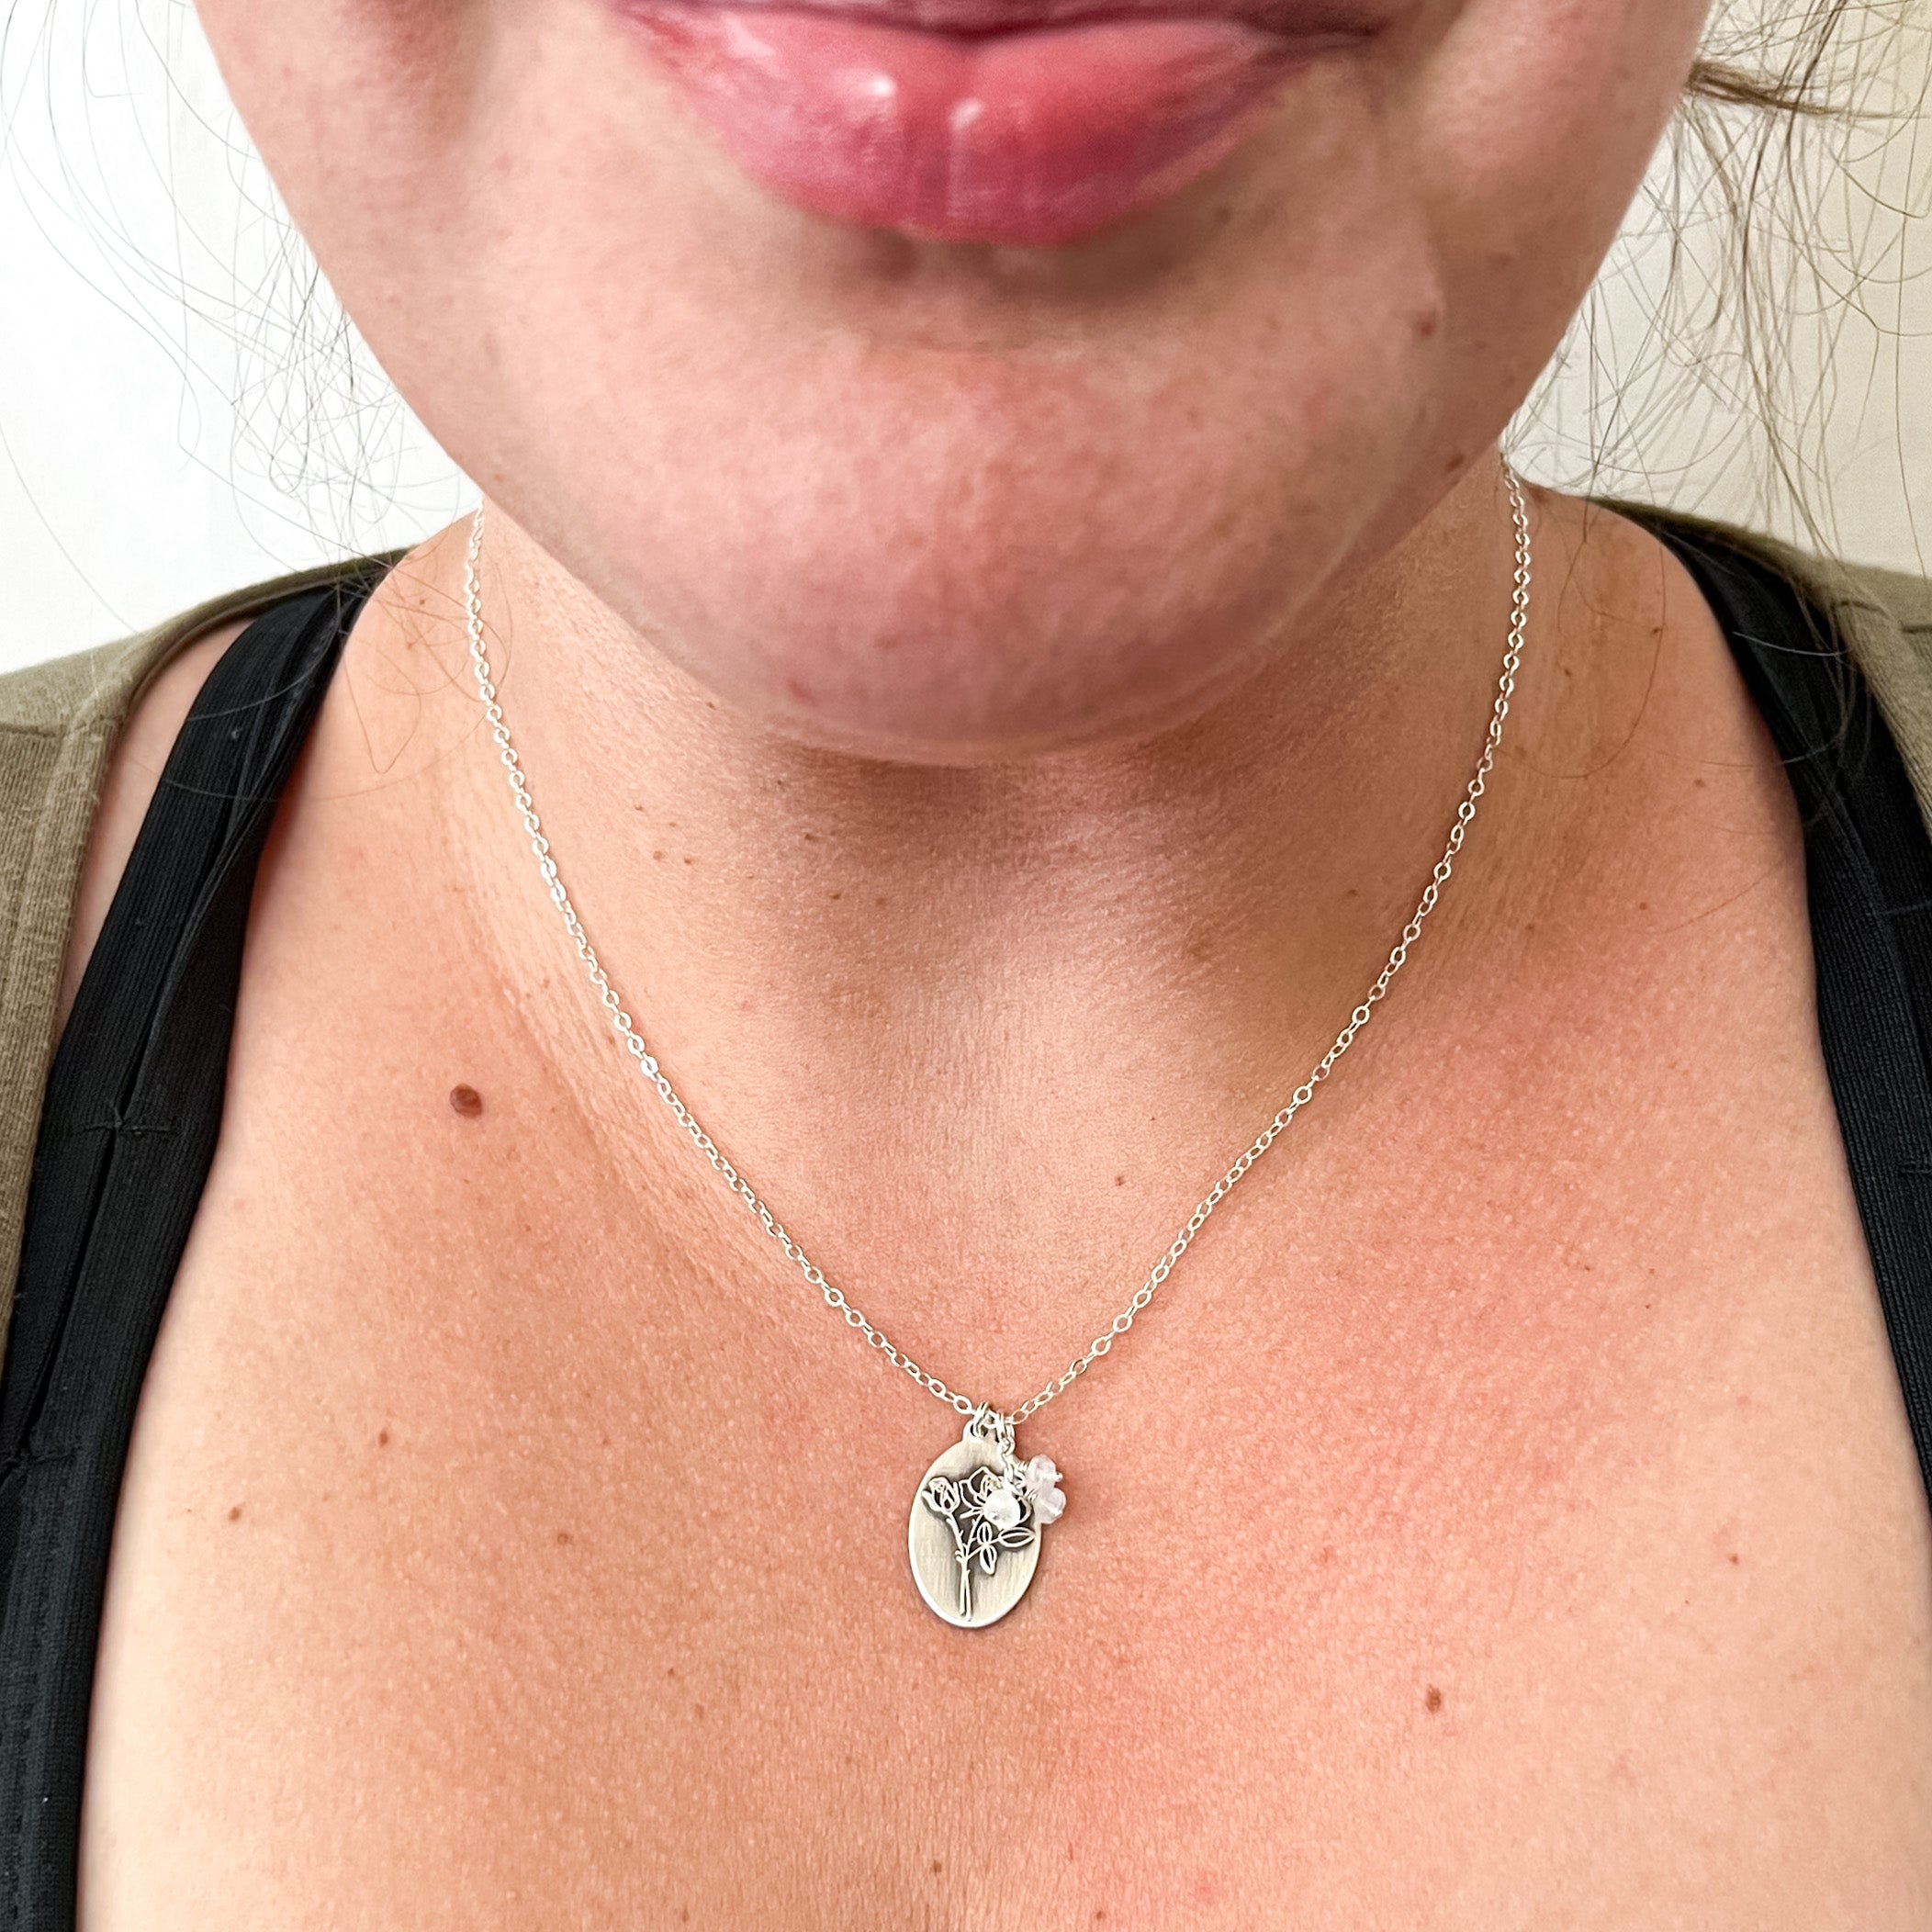 Rose Necklace | June Birth Flower | Genuine Moonstone Birthstone | Oxidized Sterling Silver Pendant | House of Jaco